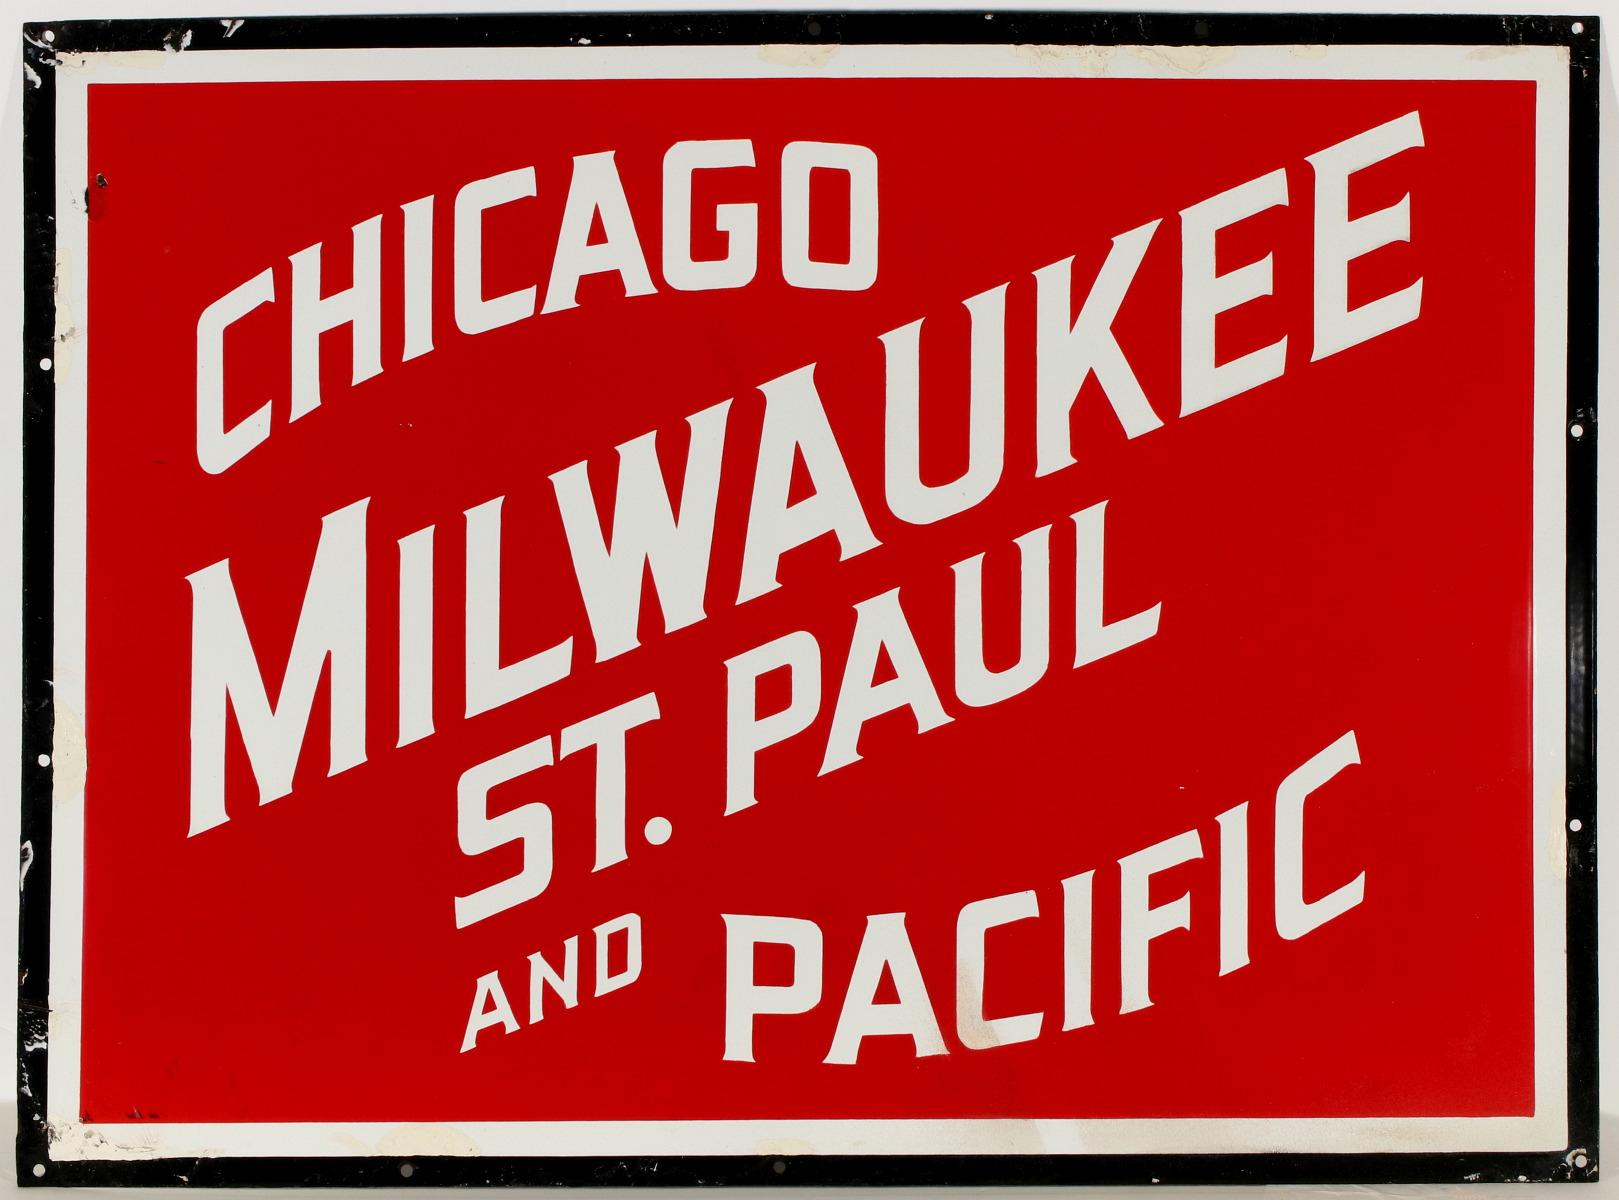 A CHICAGO MILWAUKEE ST. PAUL AND PACIFIC PORCELAIN SIGN